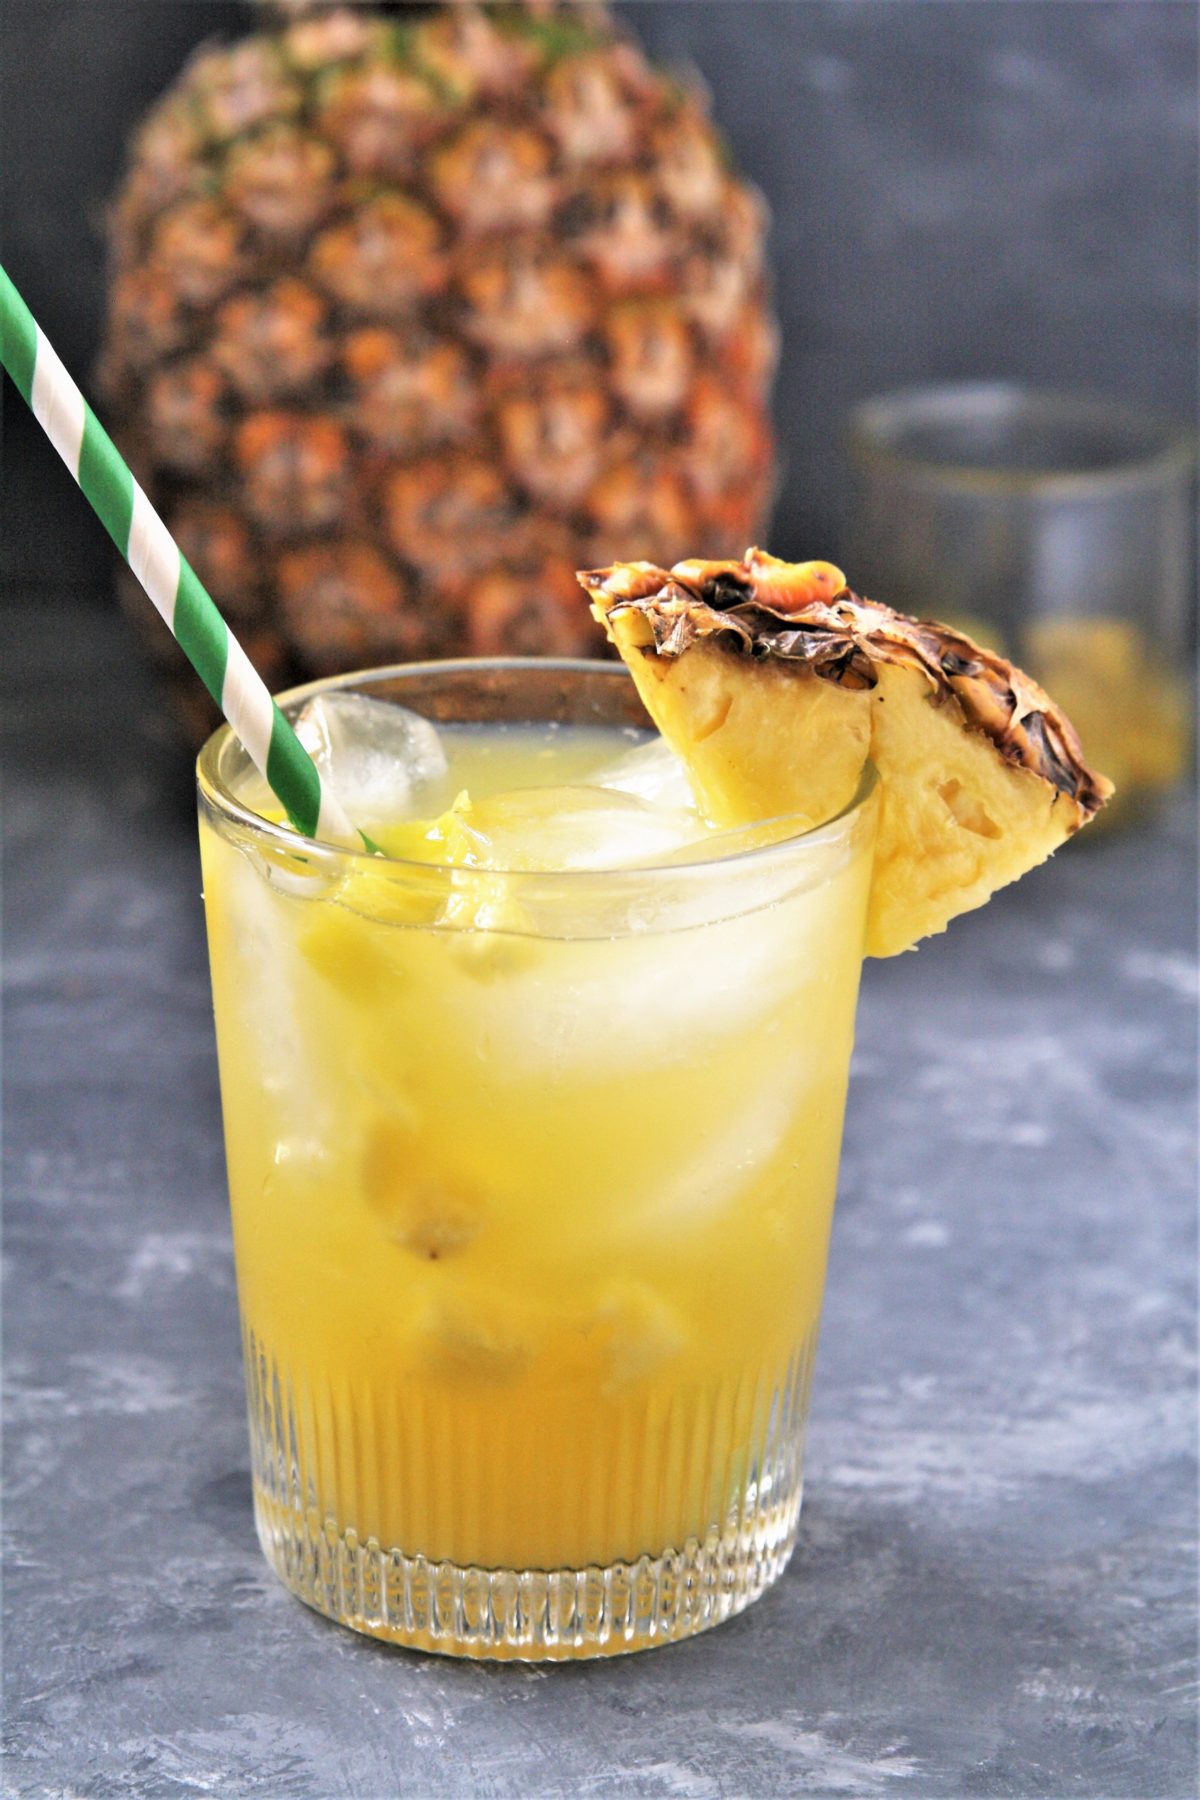 Featuring fresh pineapple chunks and tropical flavors, this Starbucks Copycat Pineapple Passionfruit Refresher is light and refreshing, making it a perfect summertime caffeine choice.